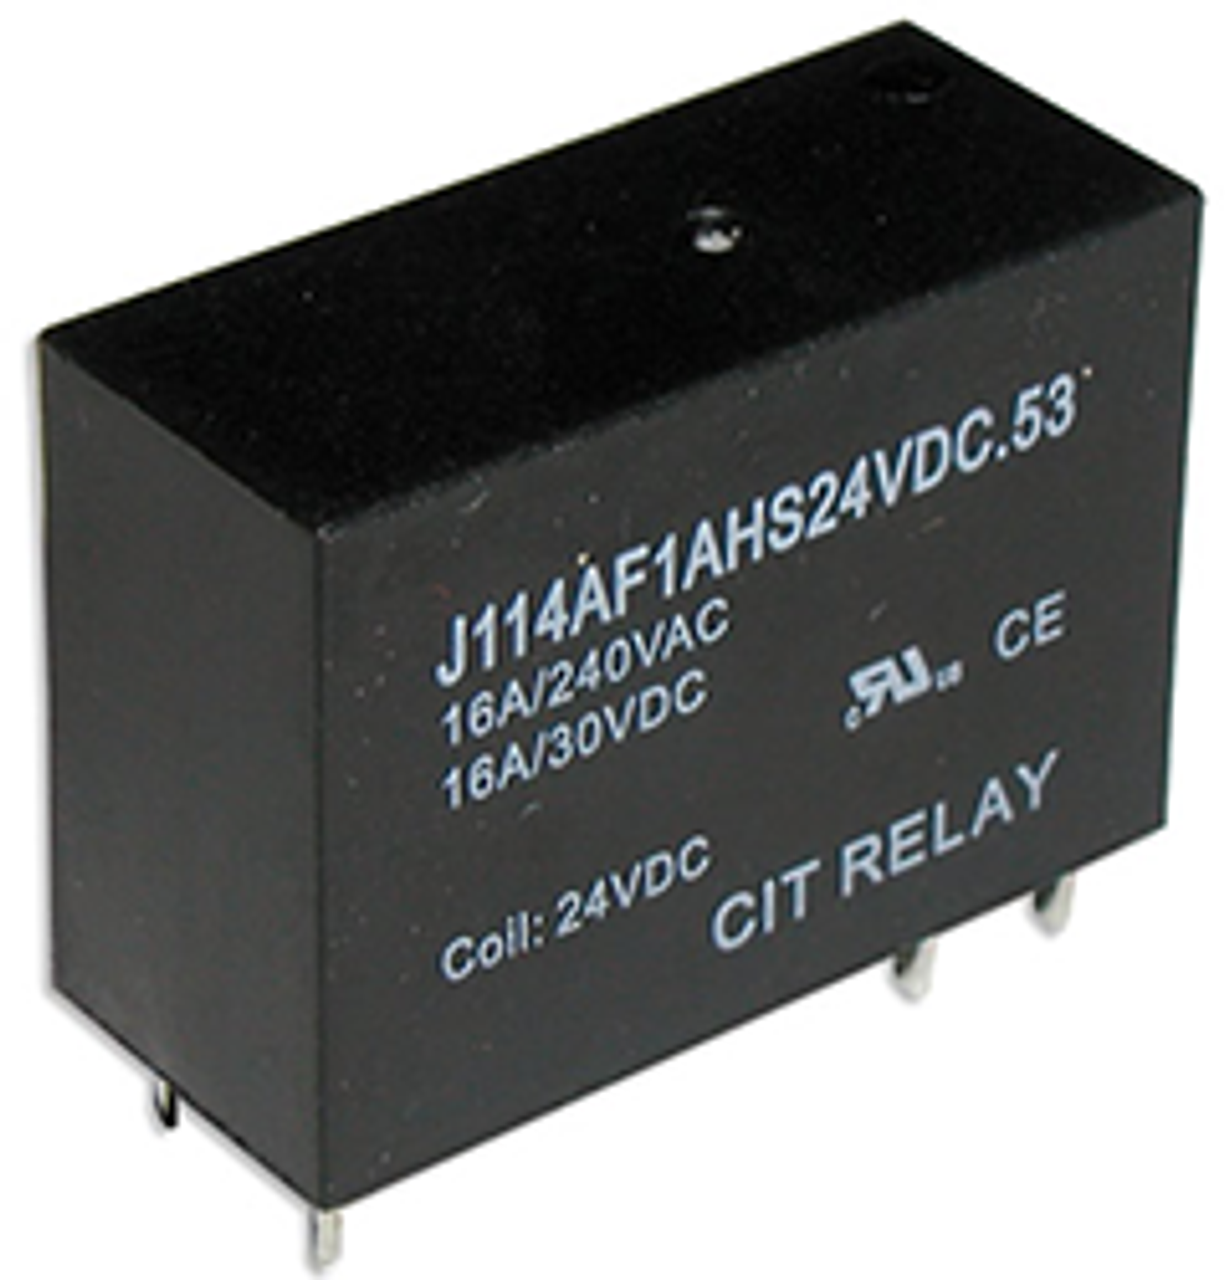 CIT Relay and Switch J114AF2AS9VDC.53 Power Relays